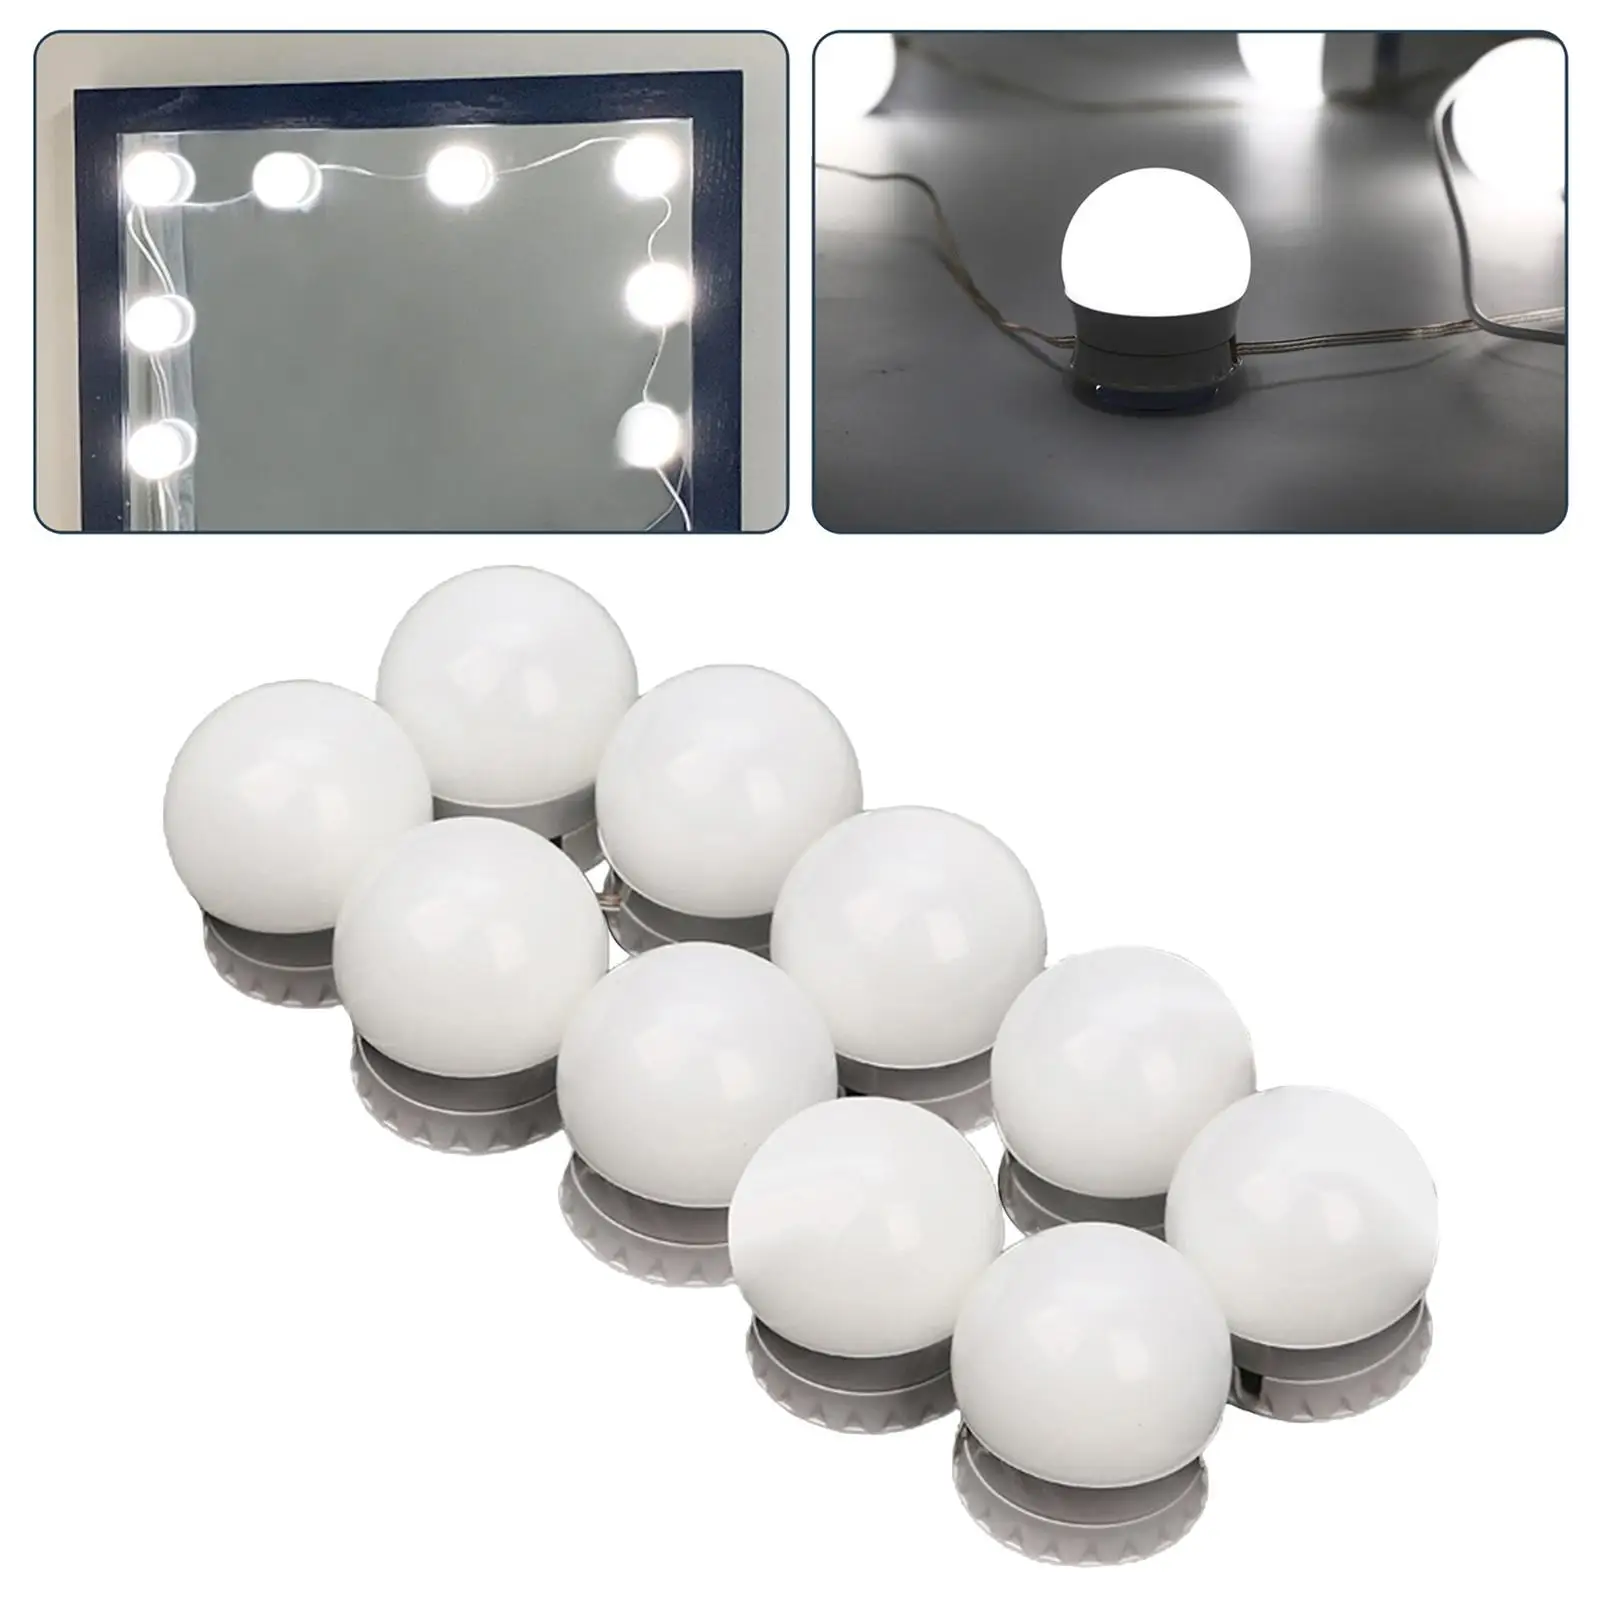 10 LED Bulbs Stepless Dimming (Cold/Neutral/Warm)Makeup Mirror Light Headlight Suction Cup Installation Vanity Light Girls Gift